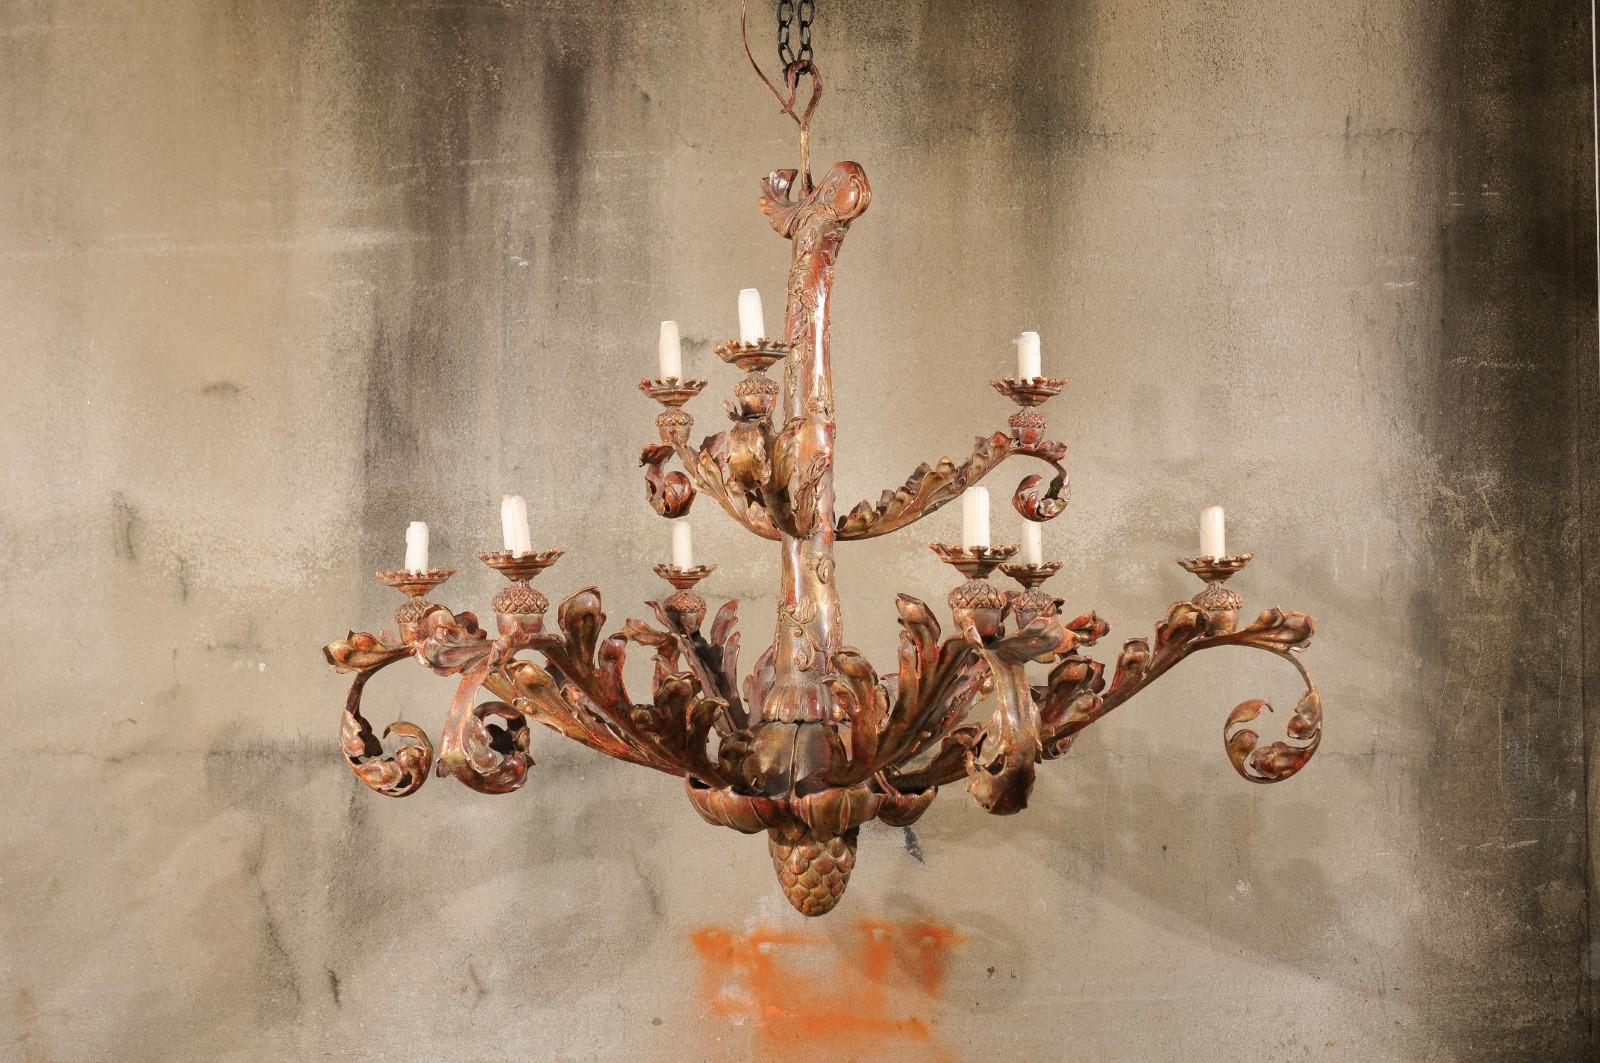 An elegant and large-sized Italian Renaissance-style two-tier chandelier. This vintage painted iron chandelier from Italy has a beautifully adorn central column body with two tiers of scrolling acanthus leaf designed arms (nine in total) curling